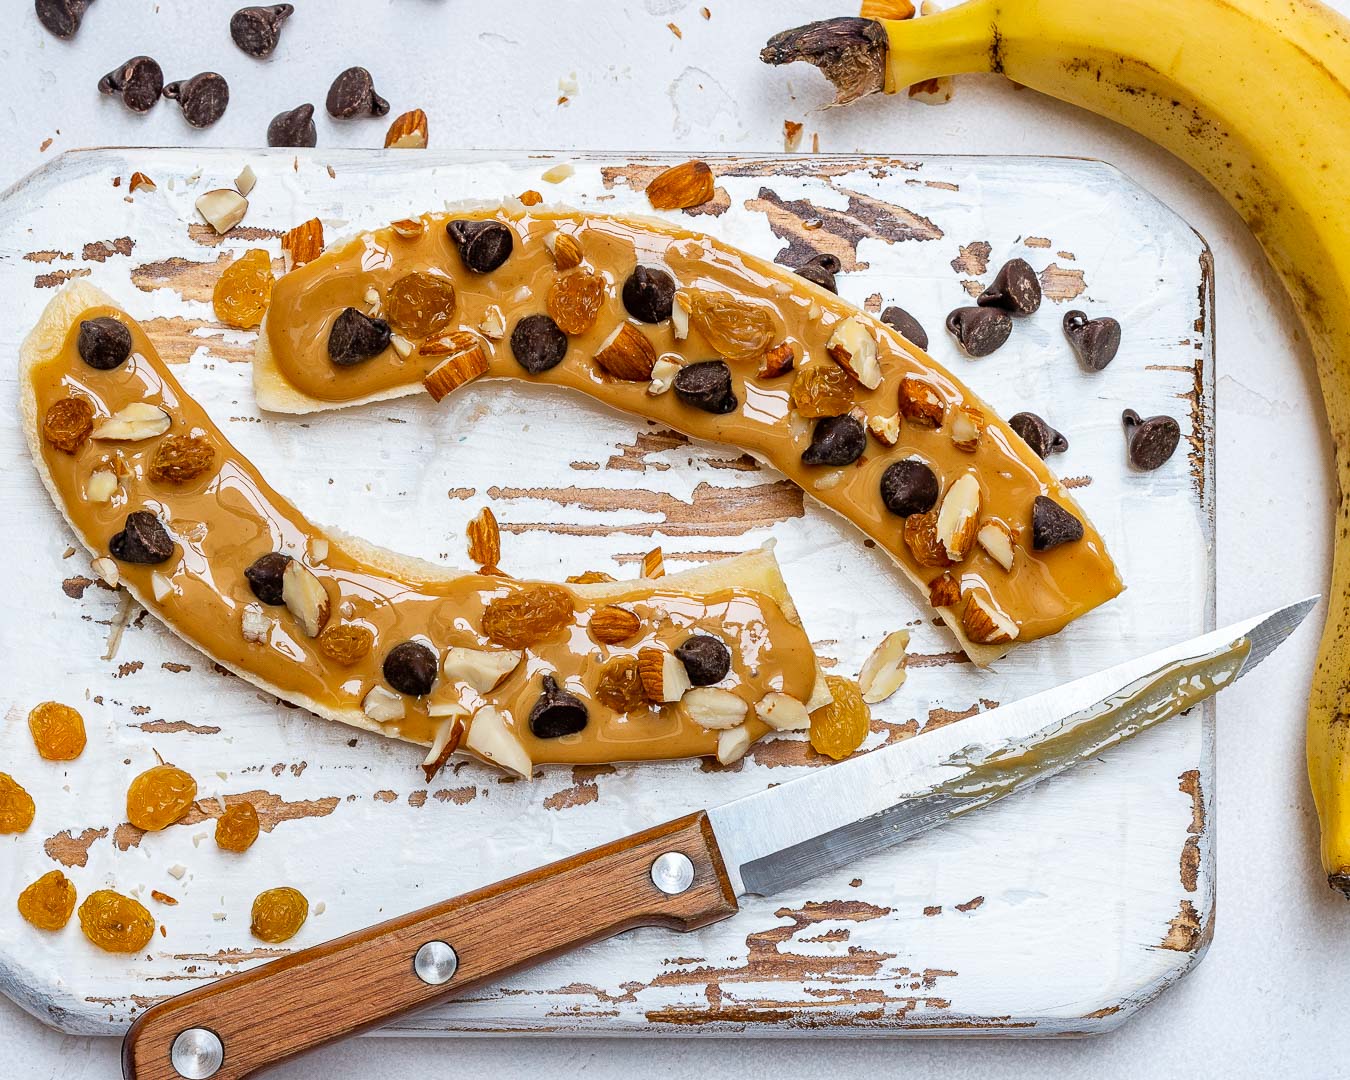 how-to-eat-chocolate-chips-and-peanut-butter-with-banana